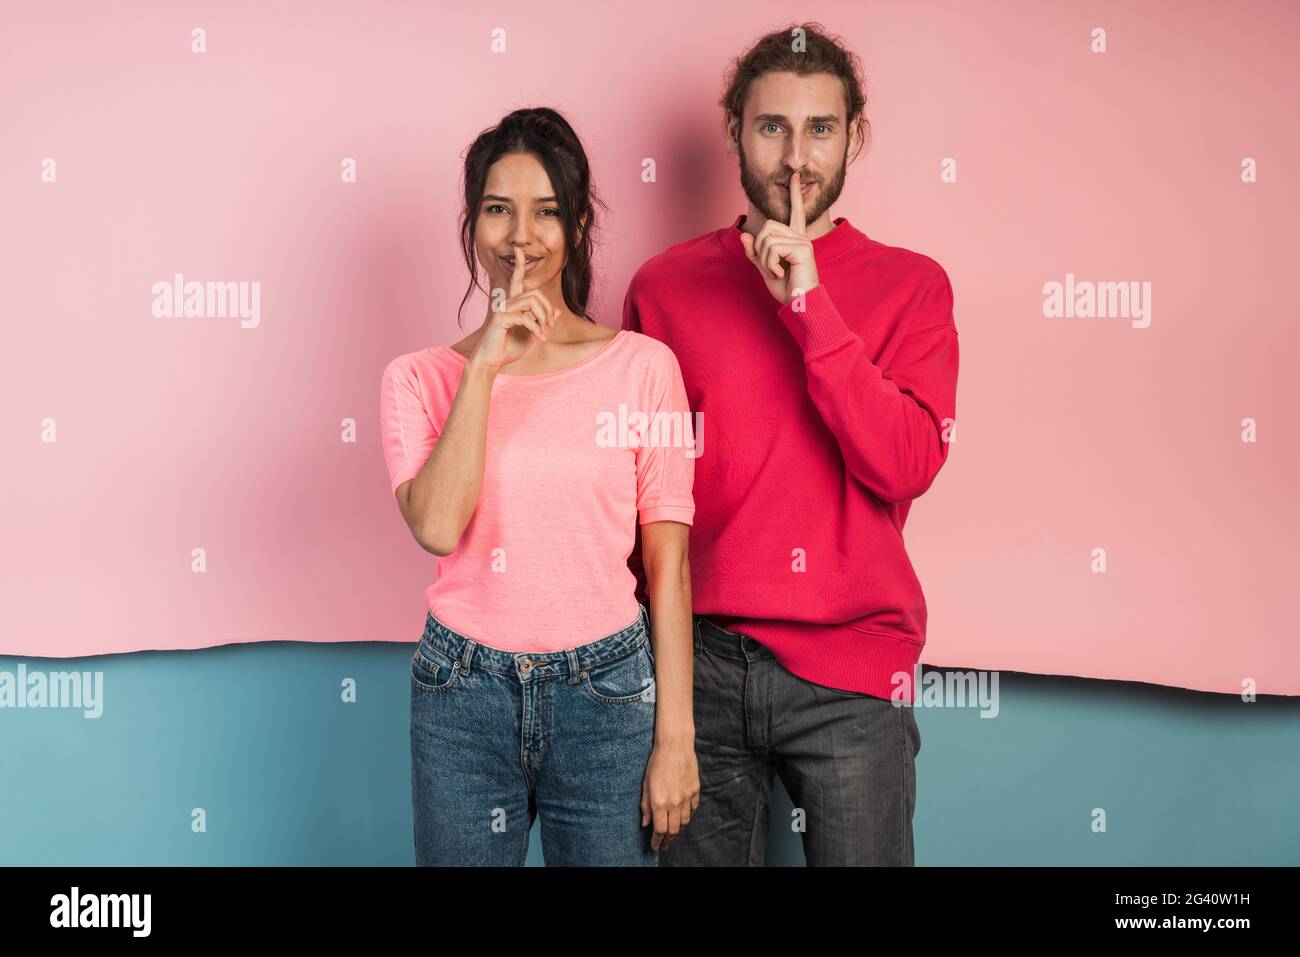 Attractive young couple making a gesture to be quiet. They touch the index fingers of their mouths on a pink and blue background. Stock Photo